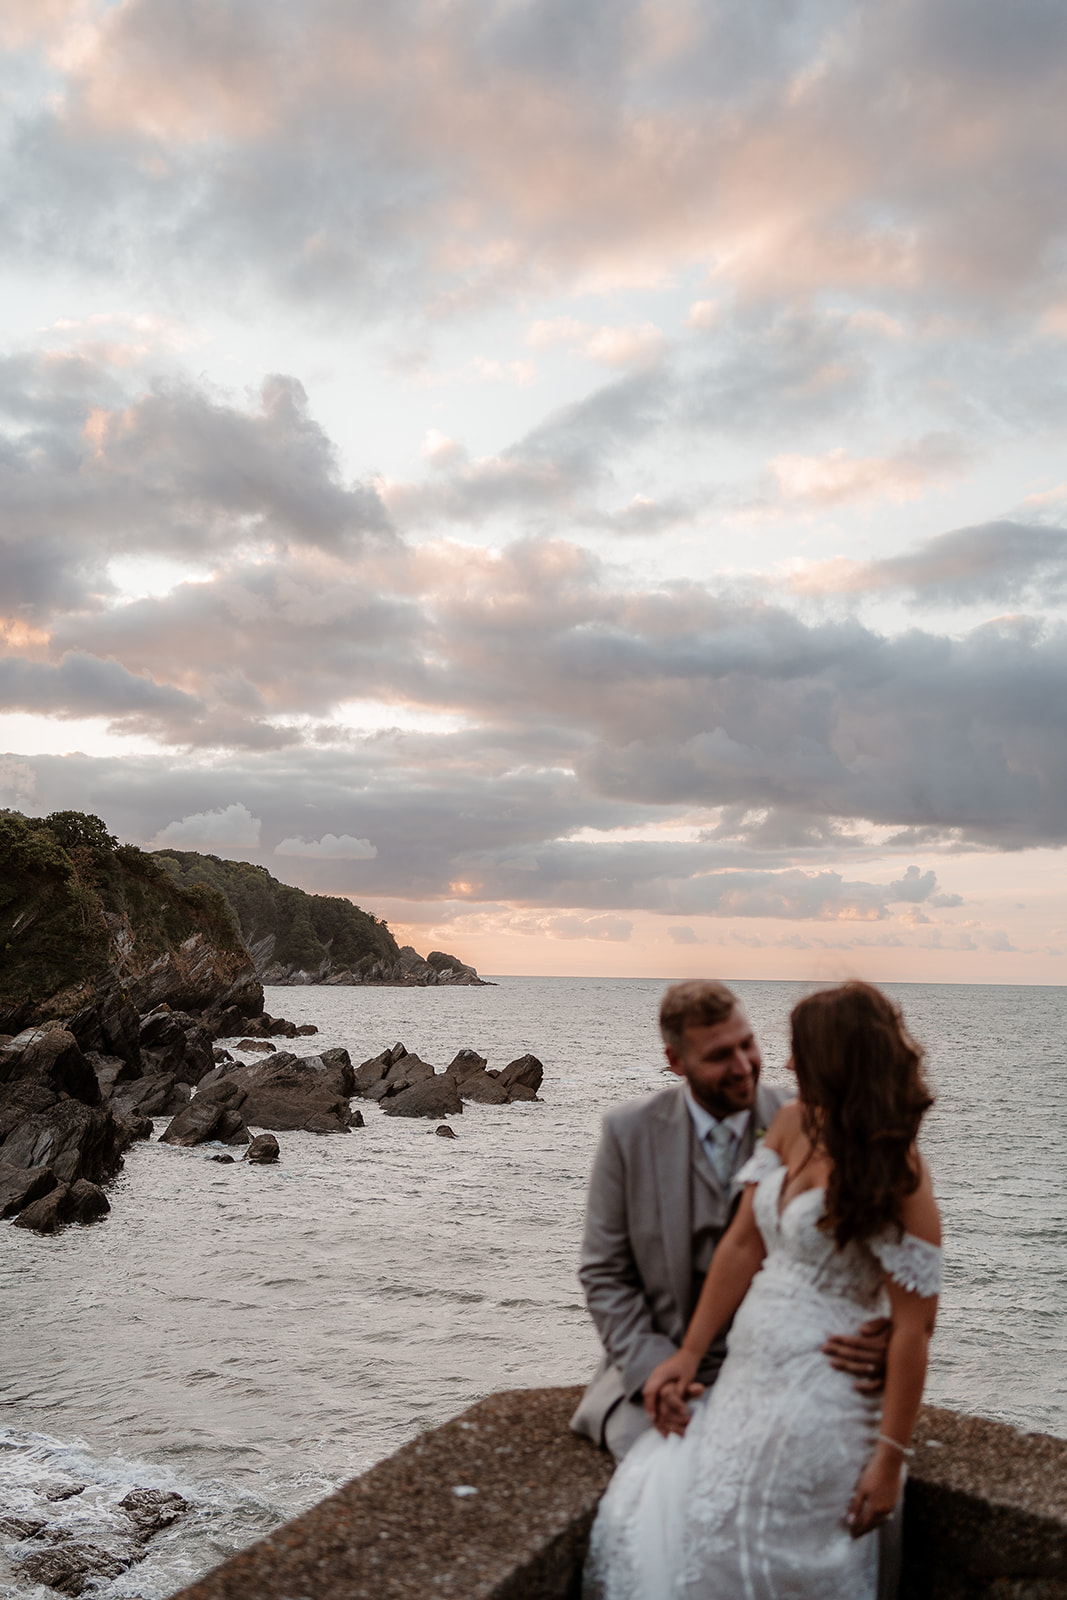 Bride and groom cuddle in the foreground with the pink cloudy sunset sky behind them - Sandy Cove Hotel wedding